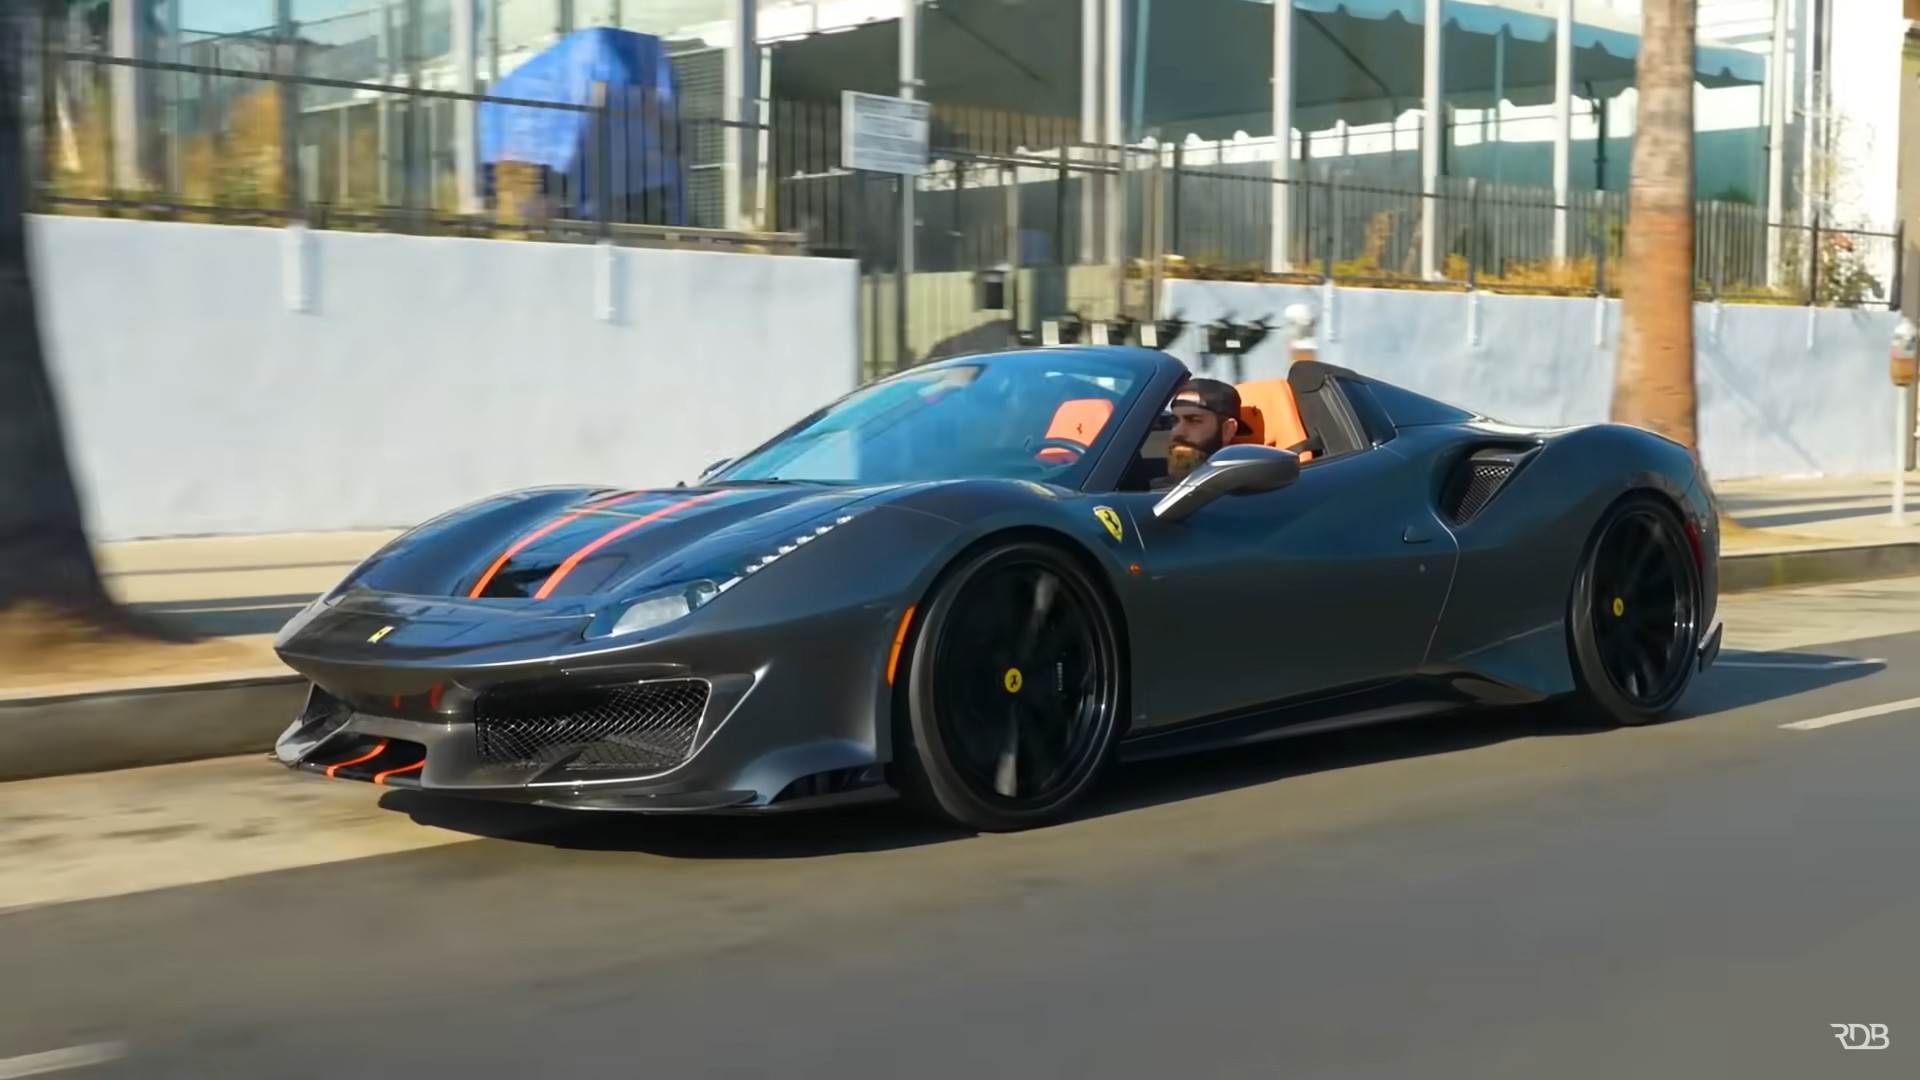 Ferrari shows off a 488 Pista customized by Tailor Made